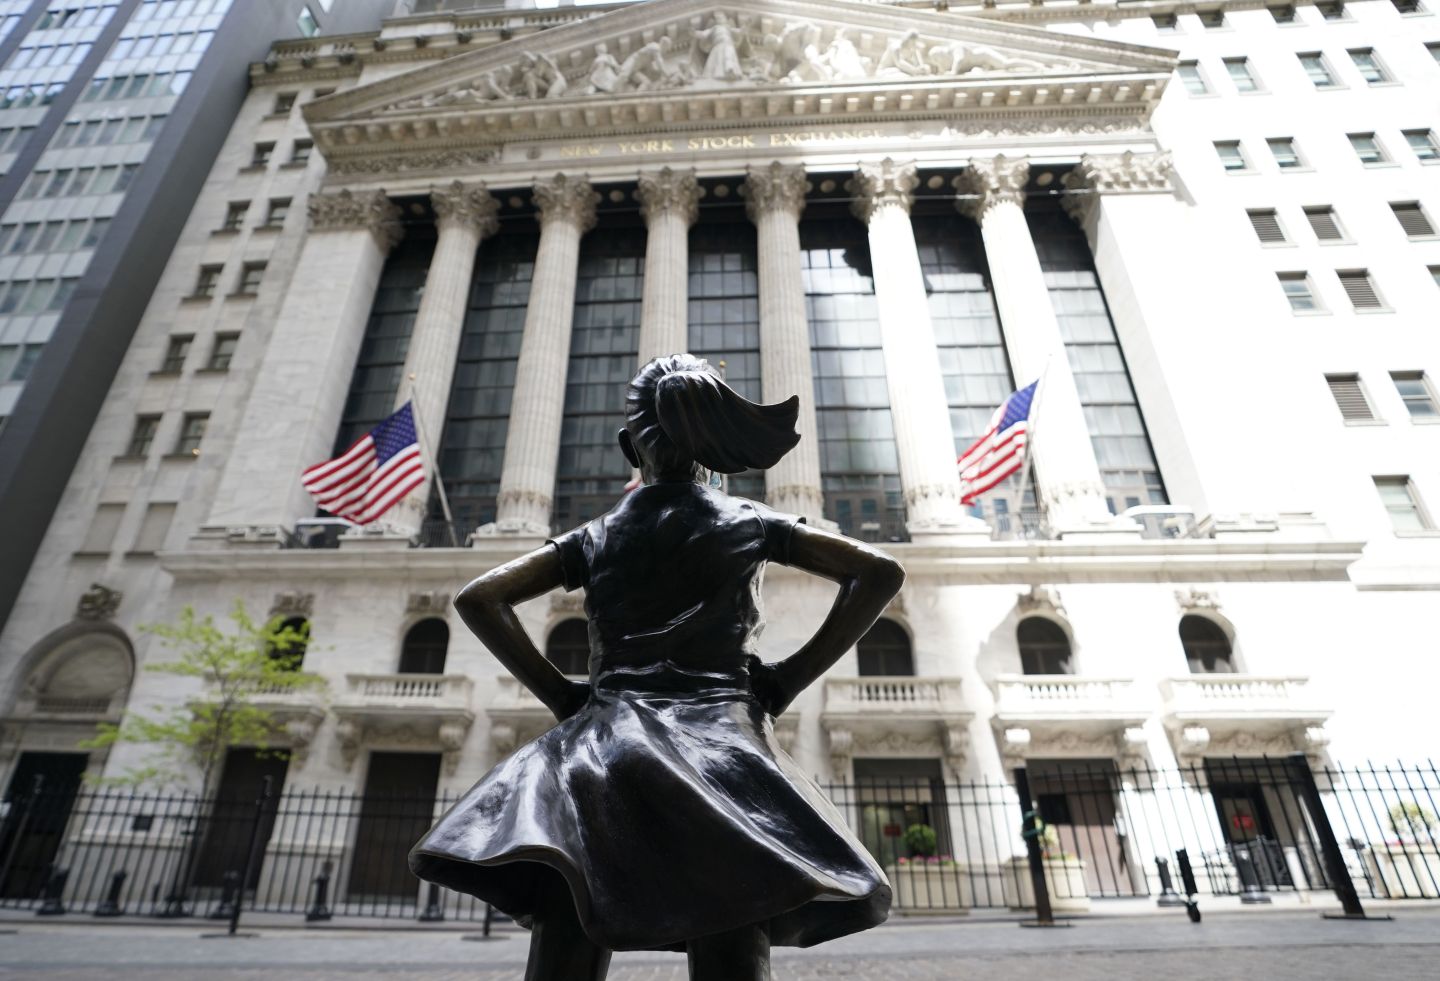 Fearless Girl, a bronze sculpture by Kristen Visbalthe, with a PPE mask on in front of the New York Stock Exchange in the Wall Street Financial District of Manhattan New York May 19, 2020.